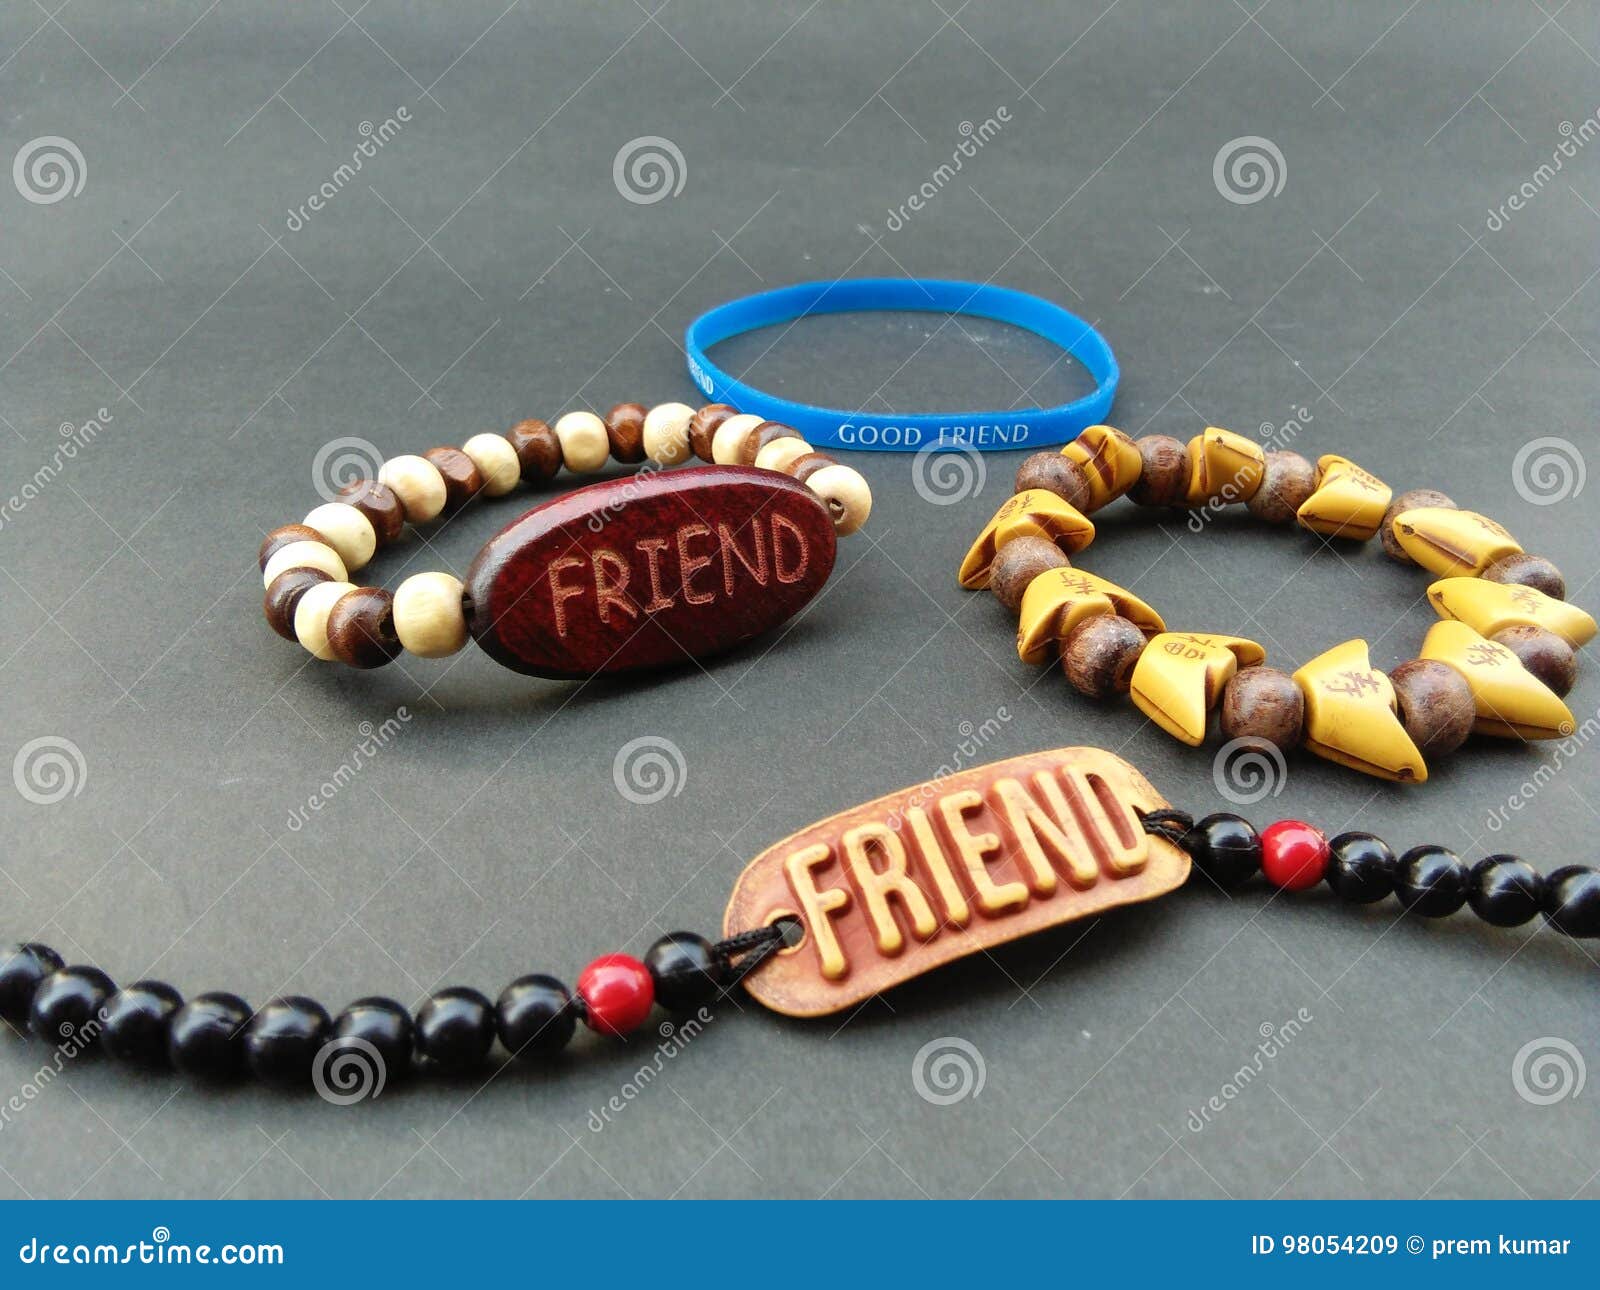 My Friend Gave Me the Best Friendship Band on Friendship Day ...